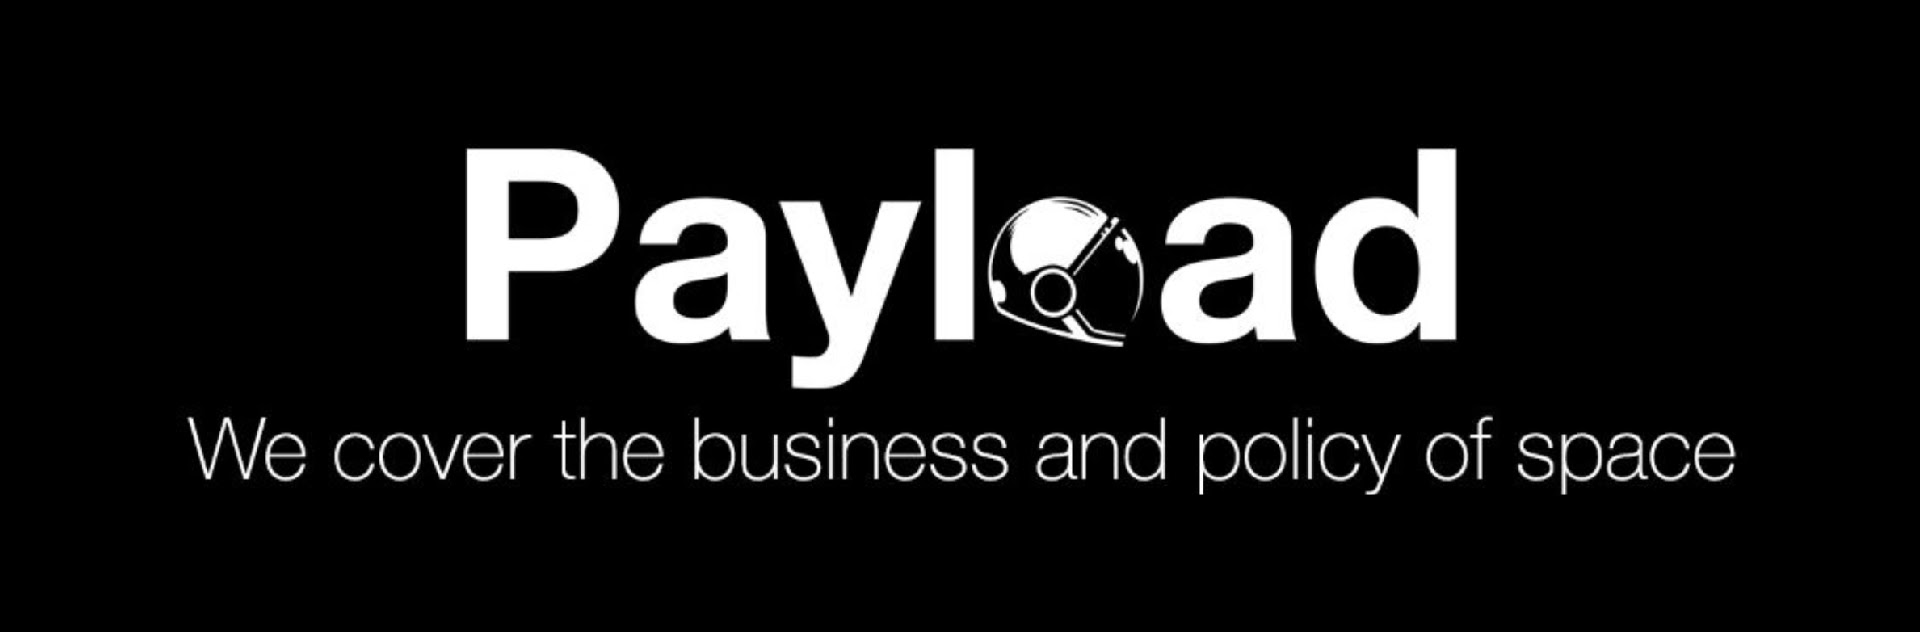 Payload: We cover the business and policy of space.